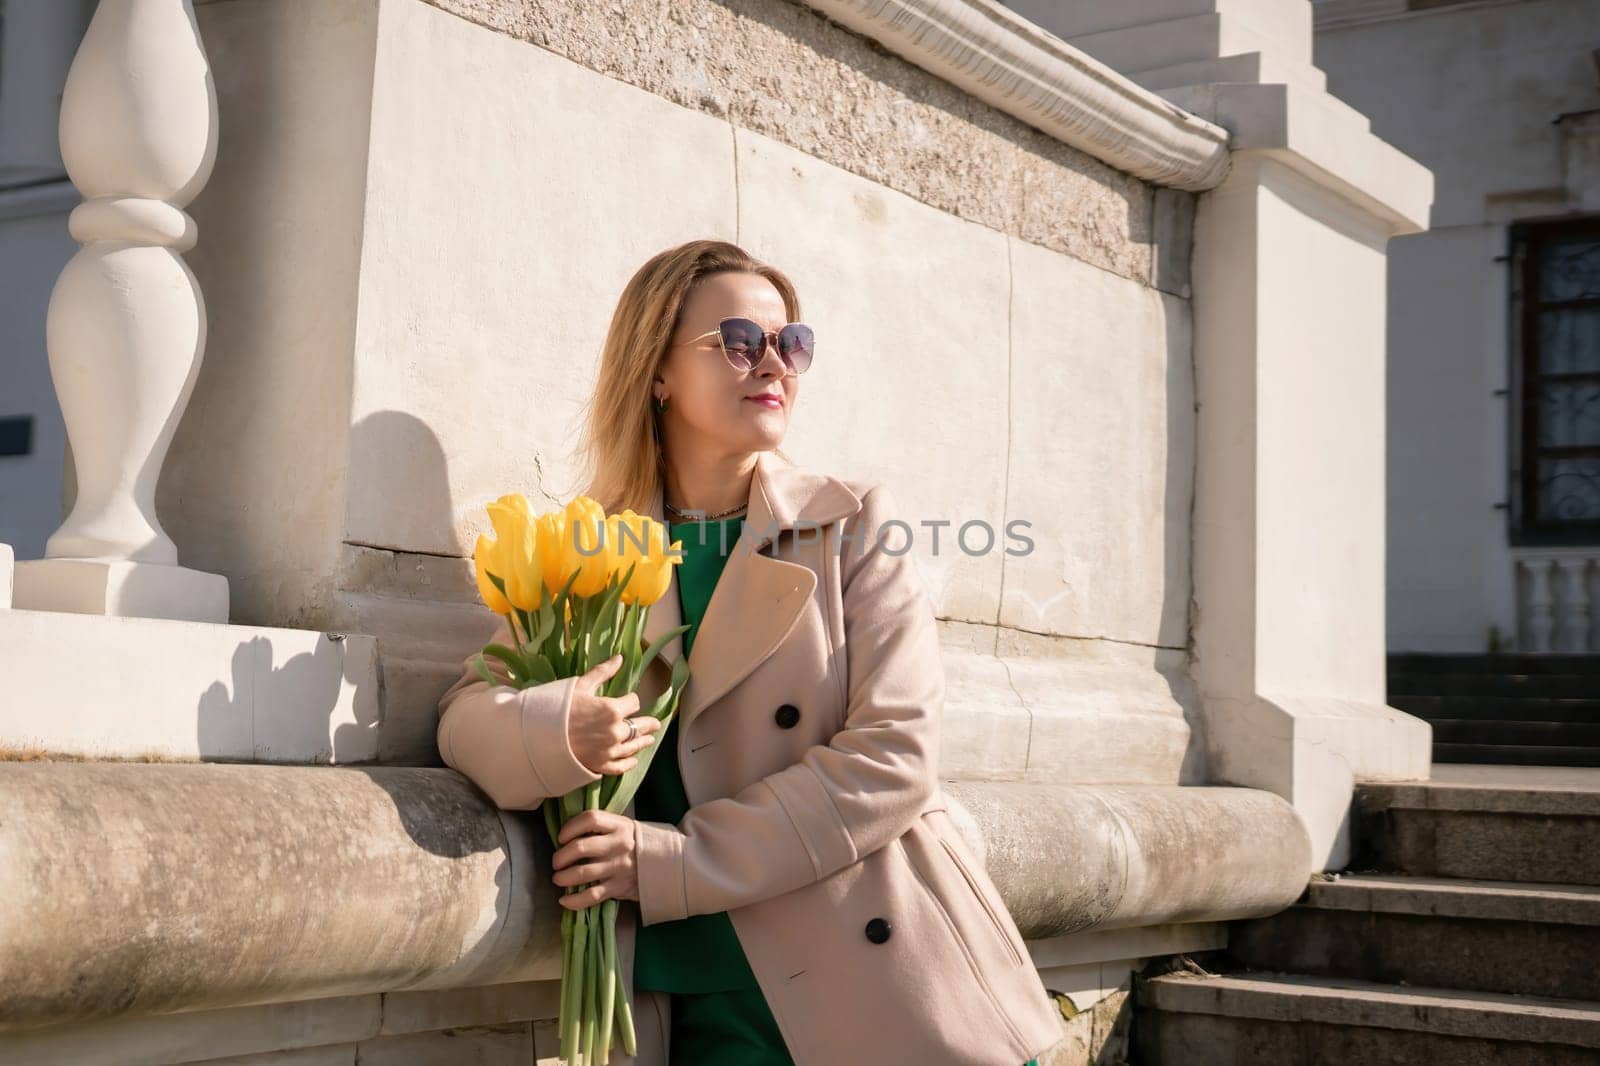 Woman holding yellow tulips, leaning against stone wall. Women's holiday concept, giving flowers